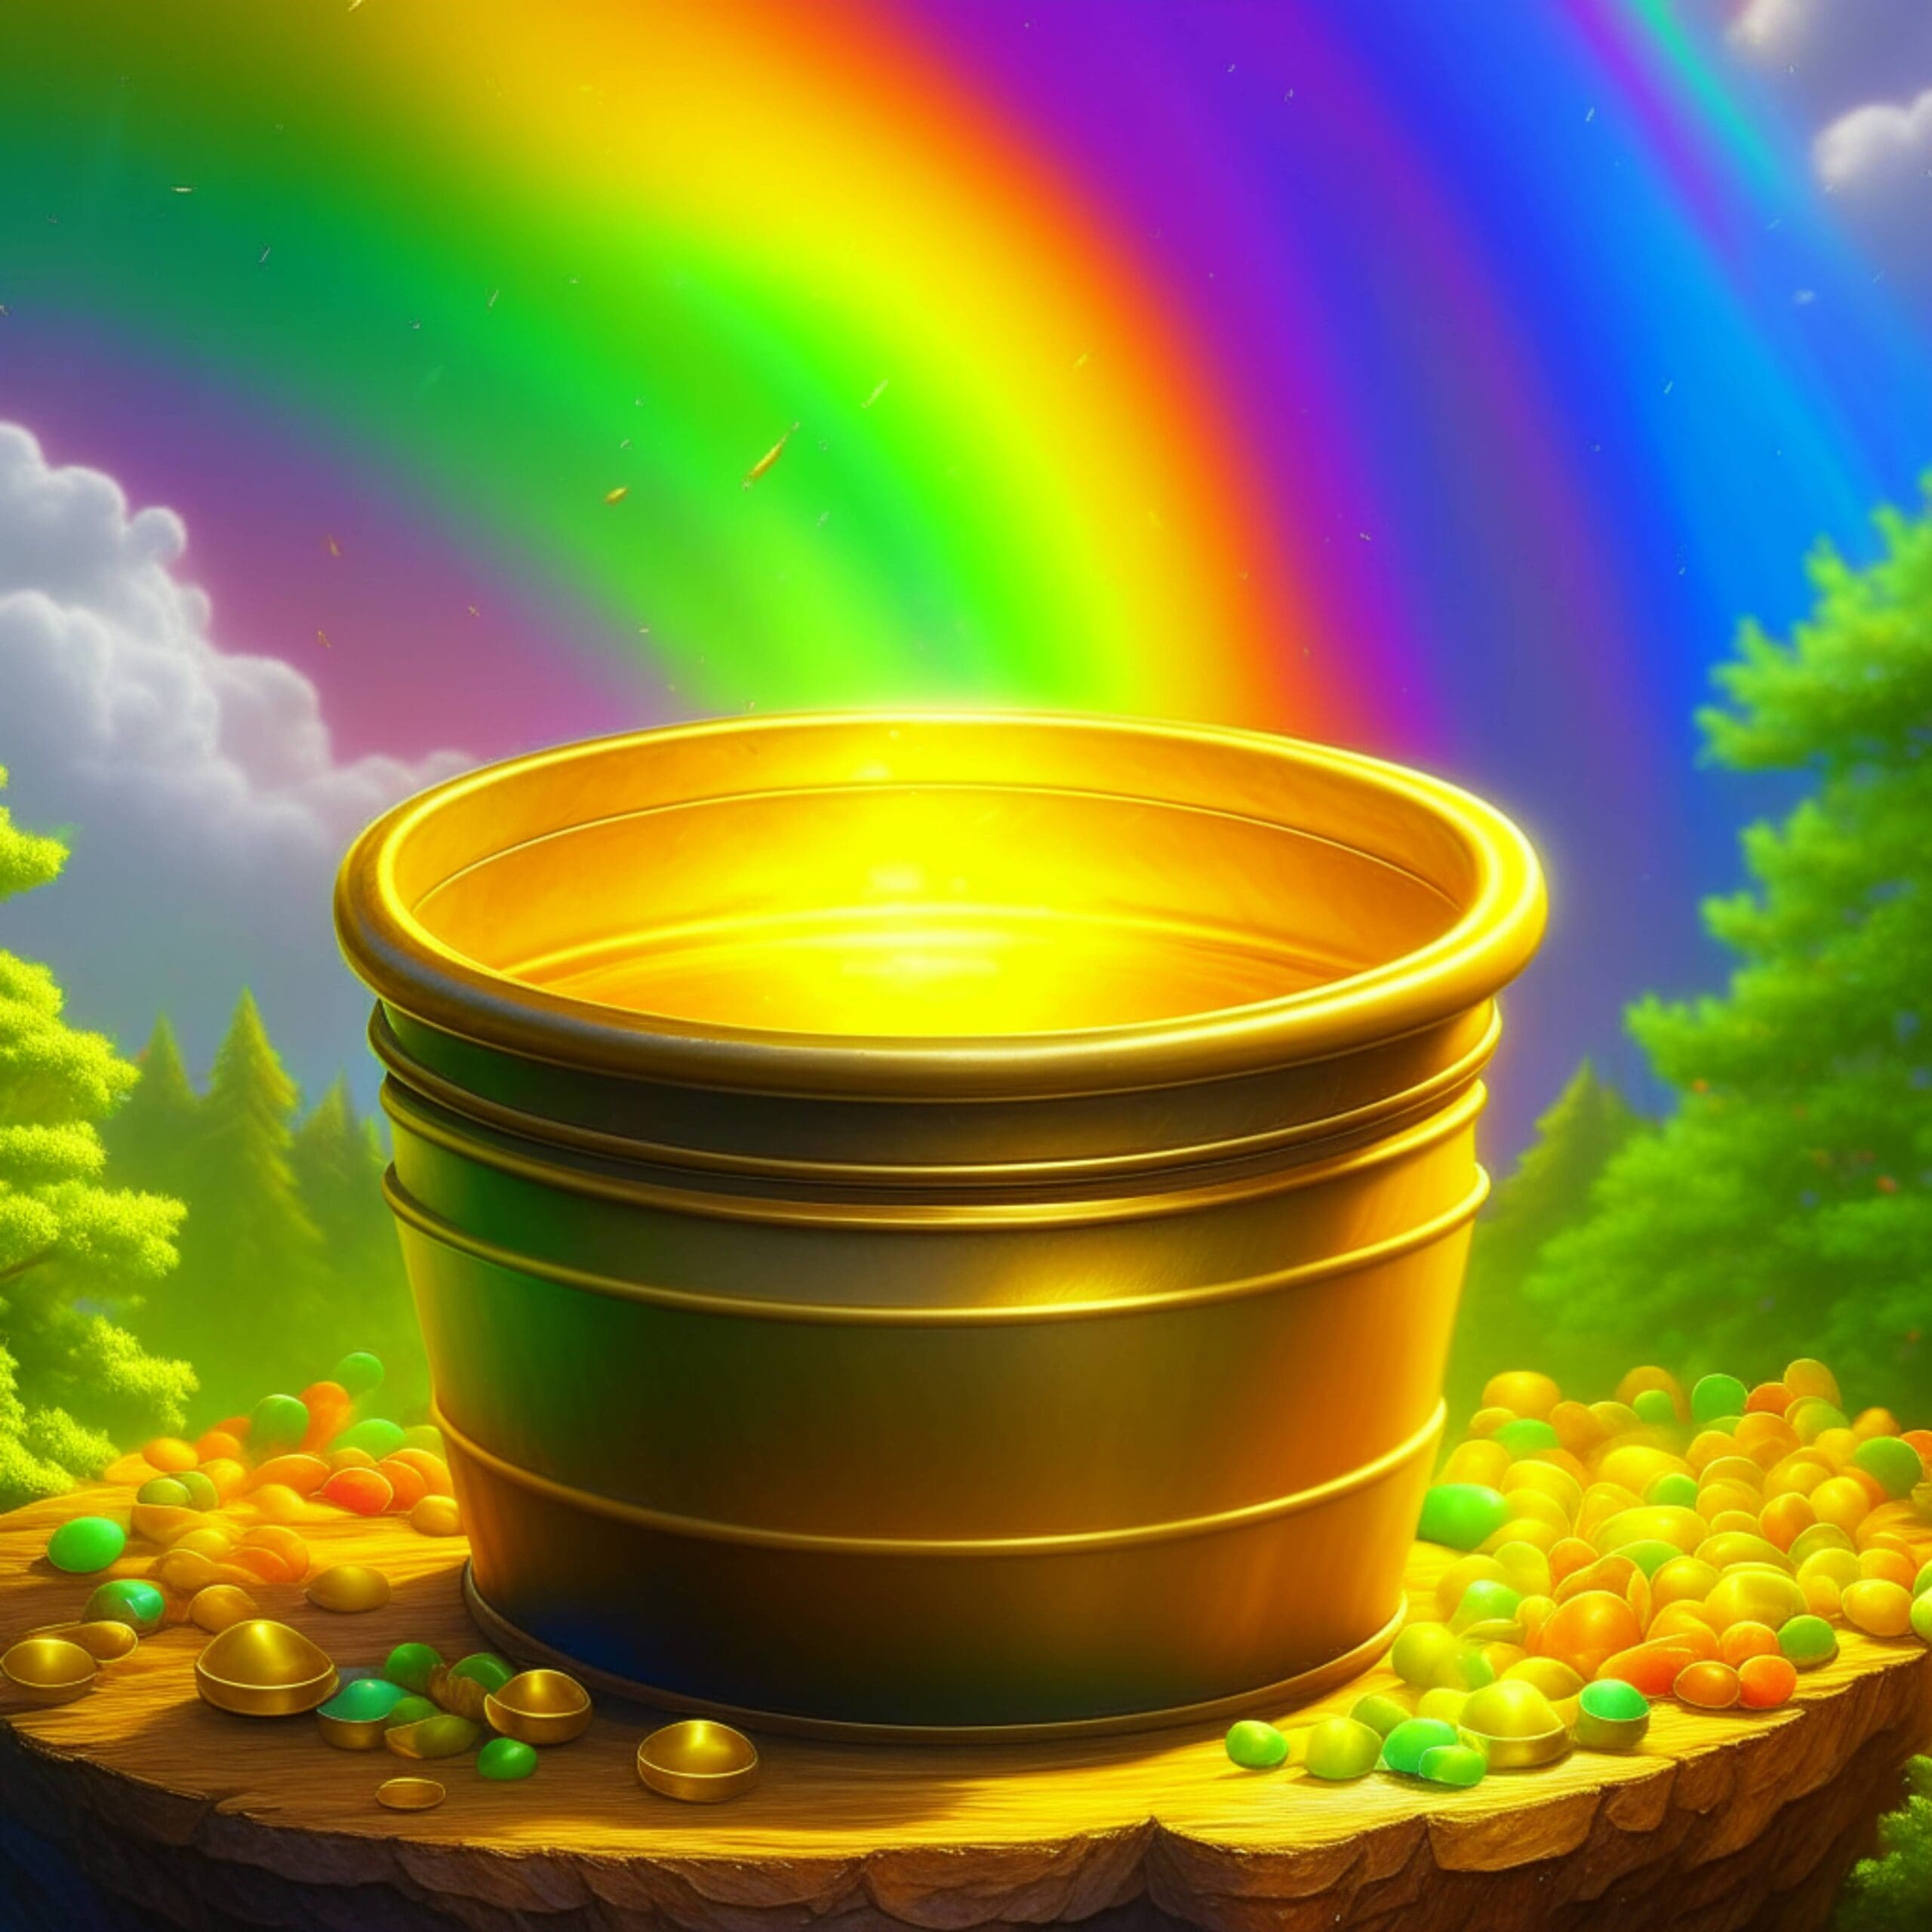 The Nexus Letter is like the Rainbow leading you to the pot of gold.